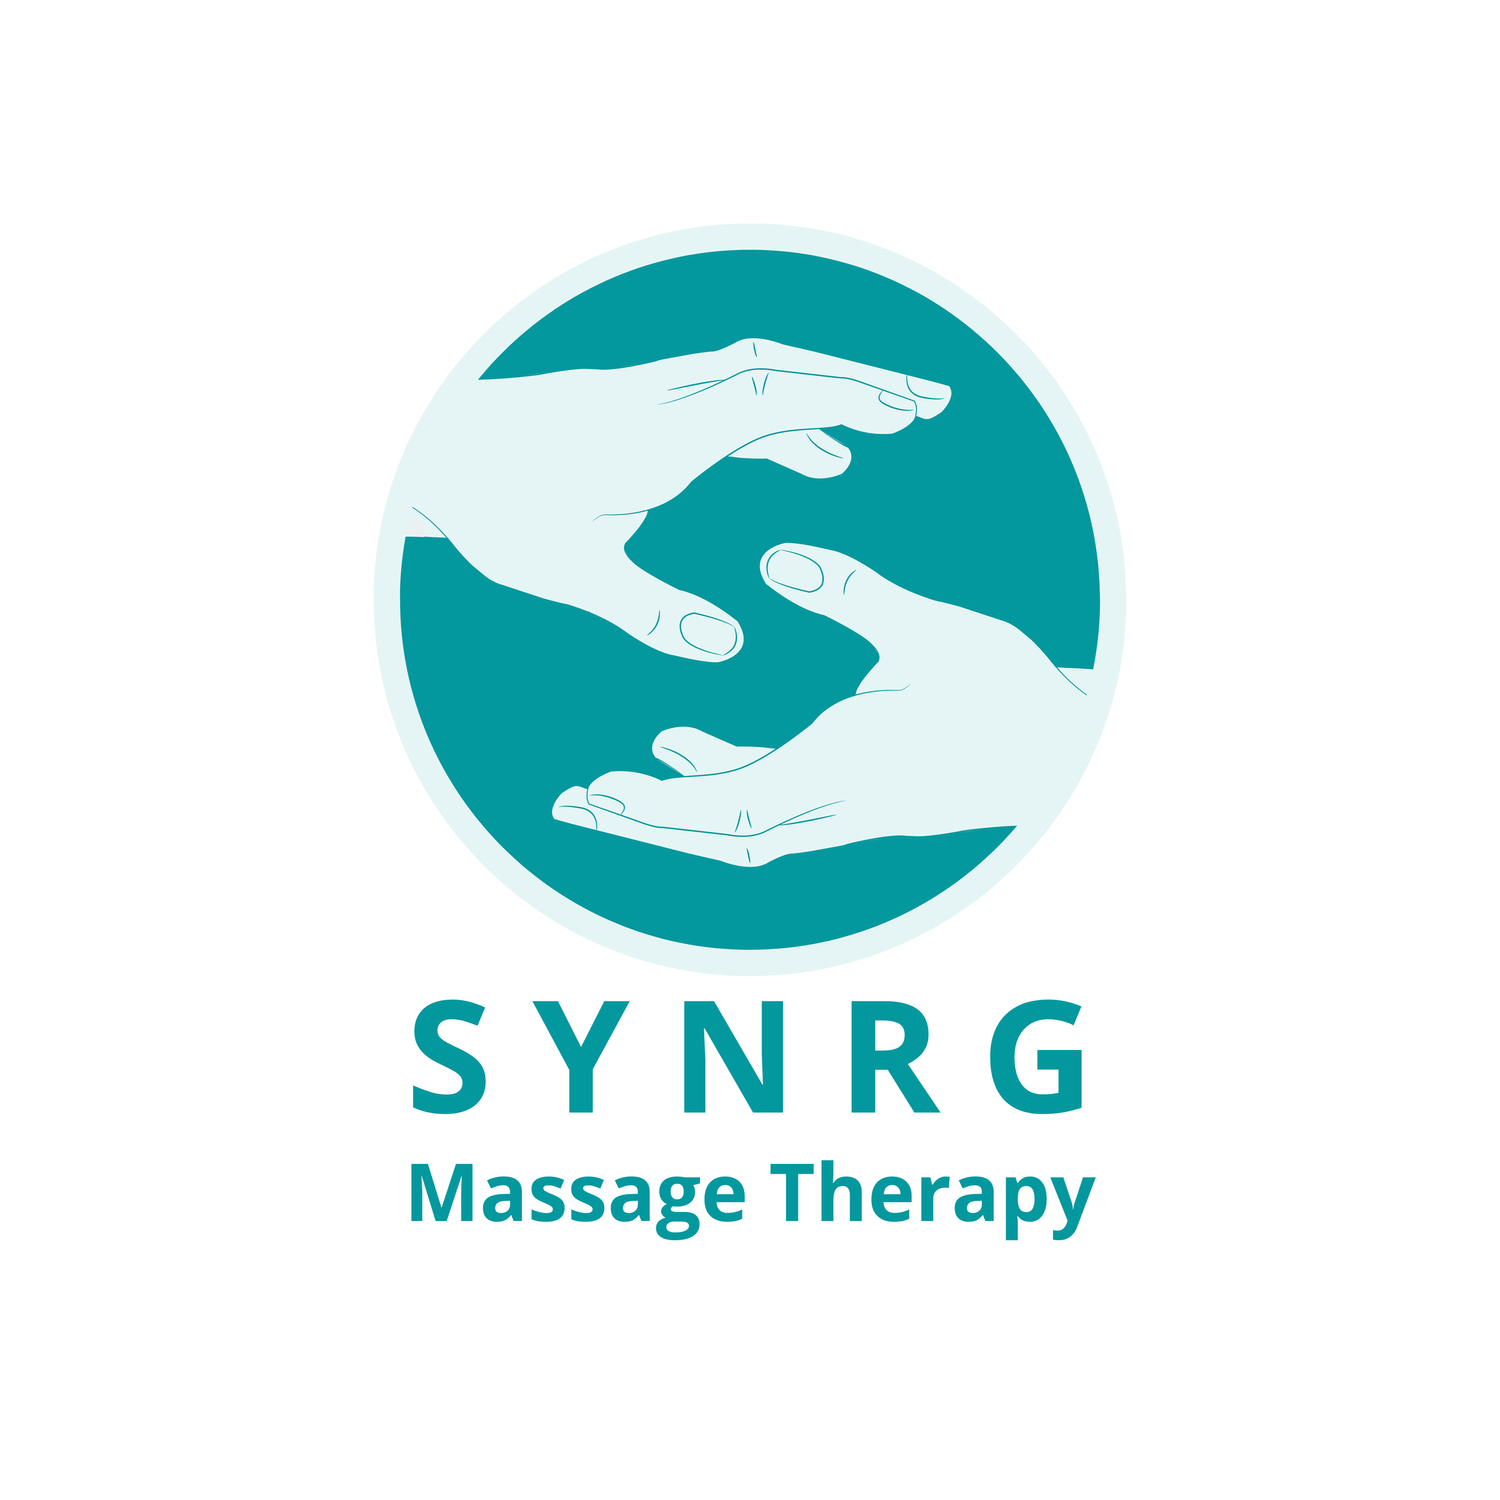 SYNRG Massage Therapy